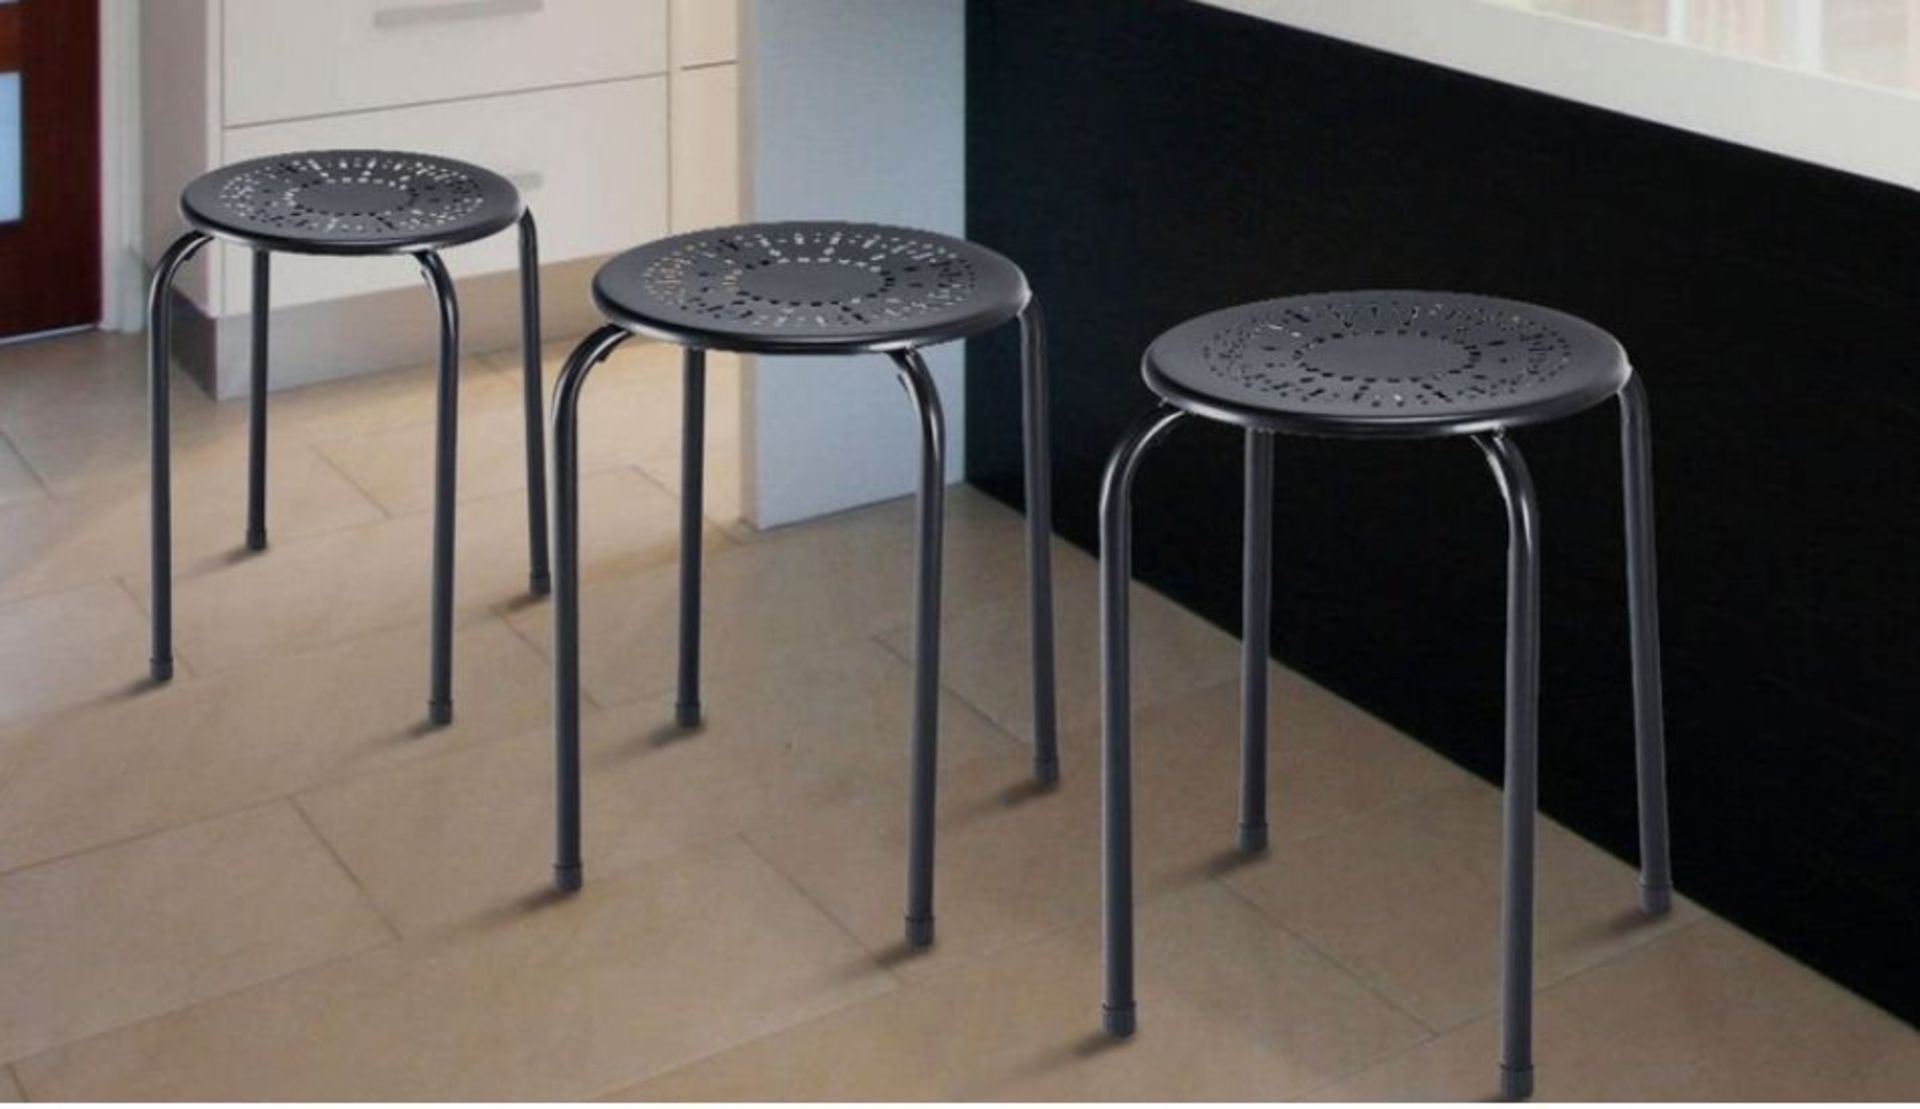 Set Of 6 Stackable Daisy Backless Round Metal Stool Set, - ER53. This metal daisy stool set can be